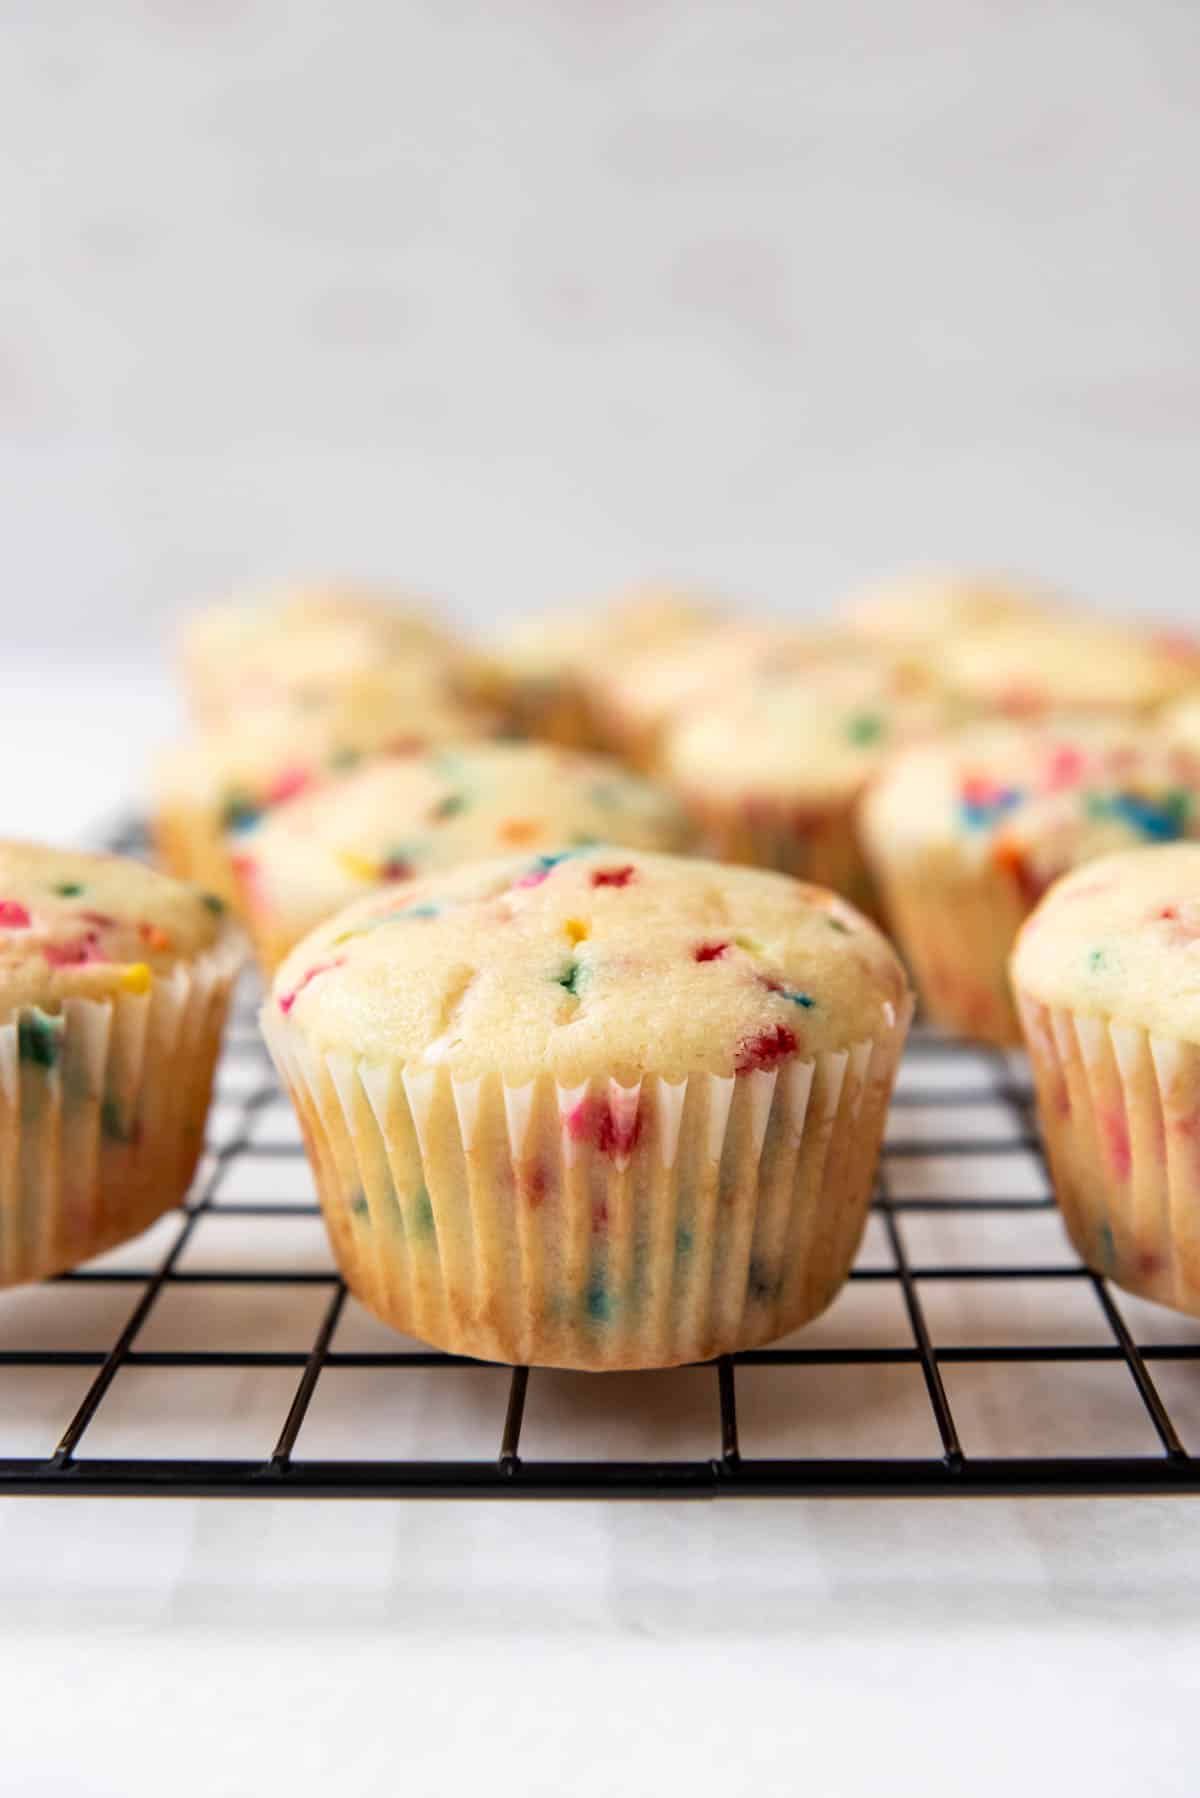 A close image of unfrosted funfetti cupcakes with a slight dome on top.